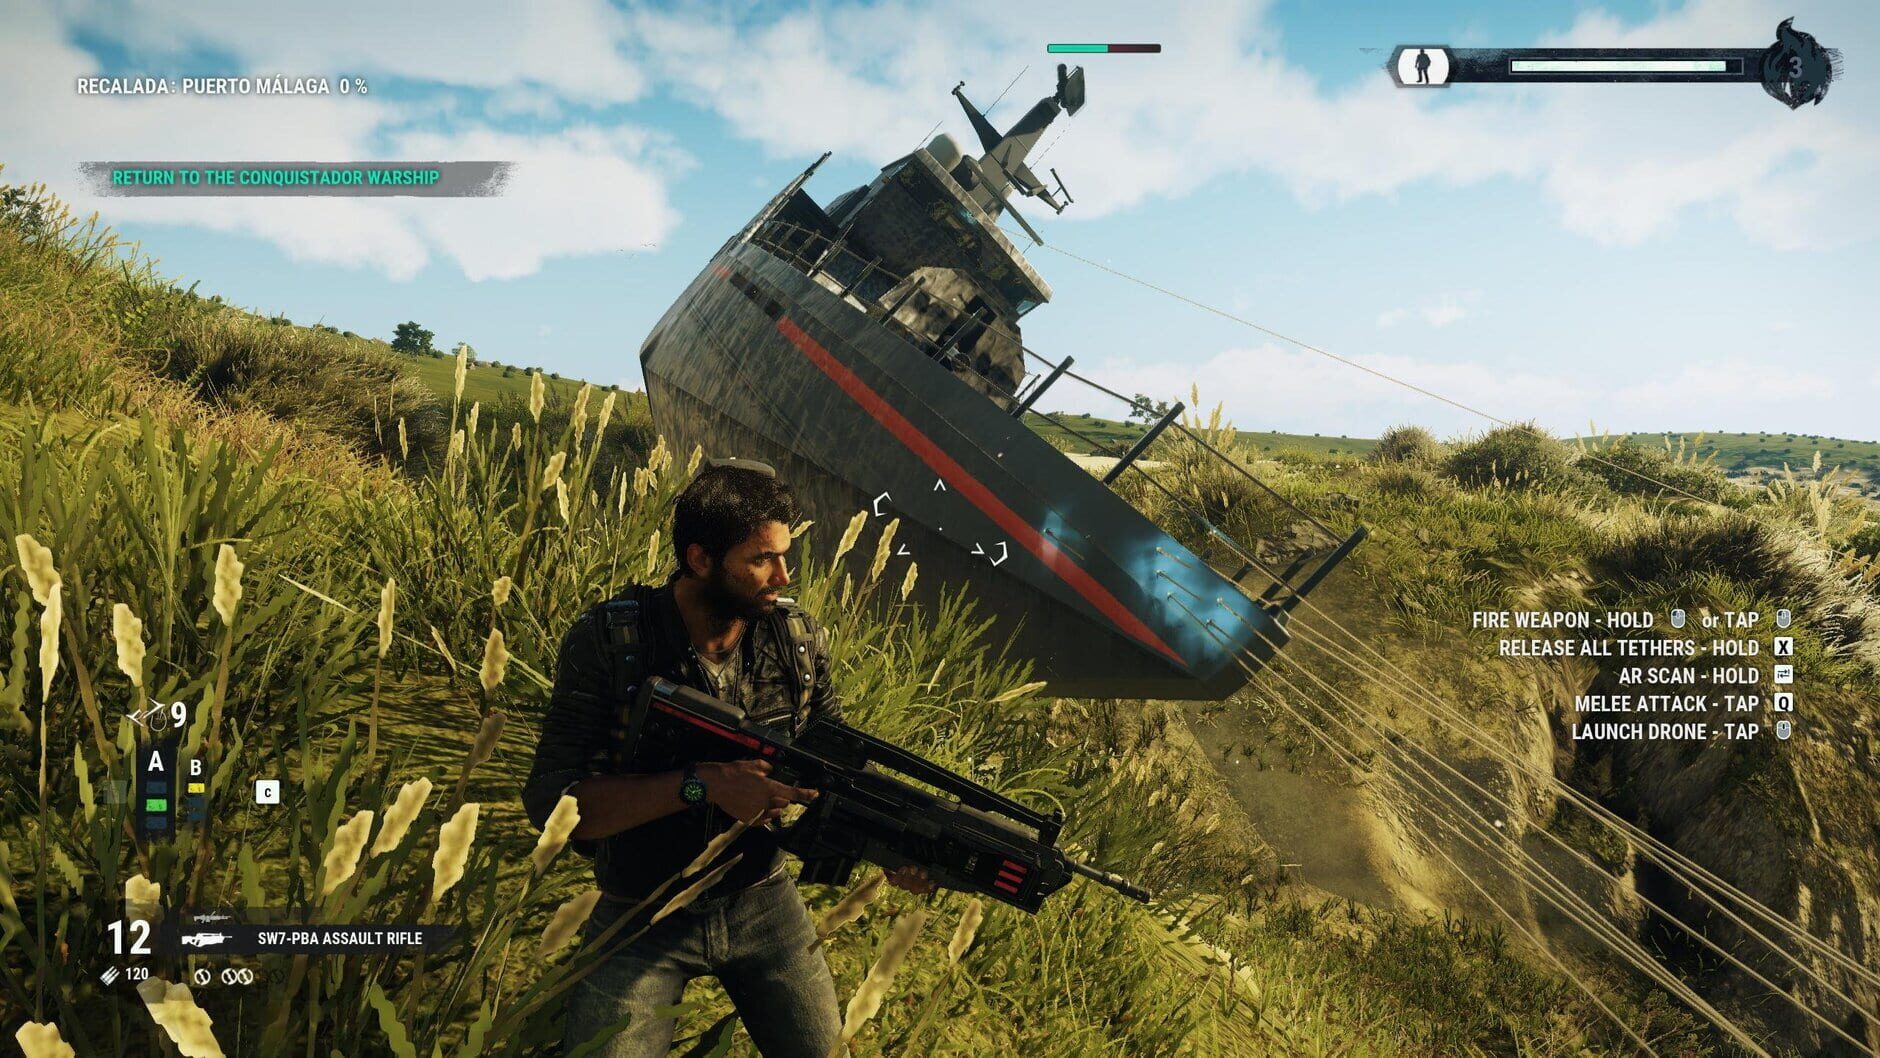 Screenshot for Just Cause 4: Digital Deluxe